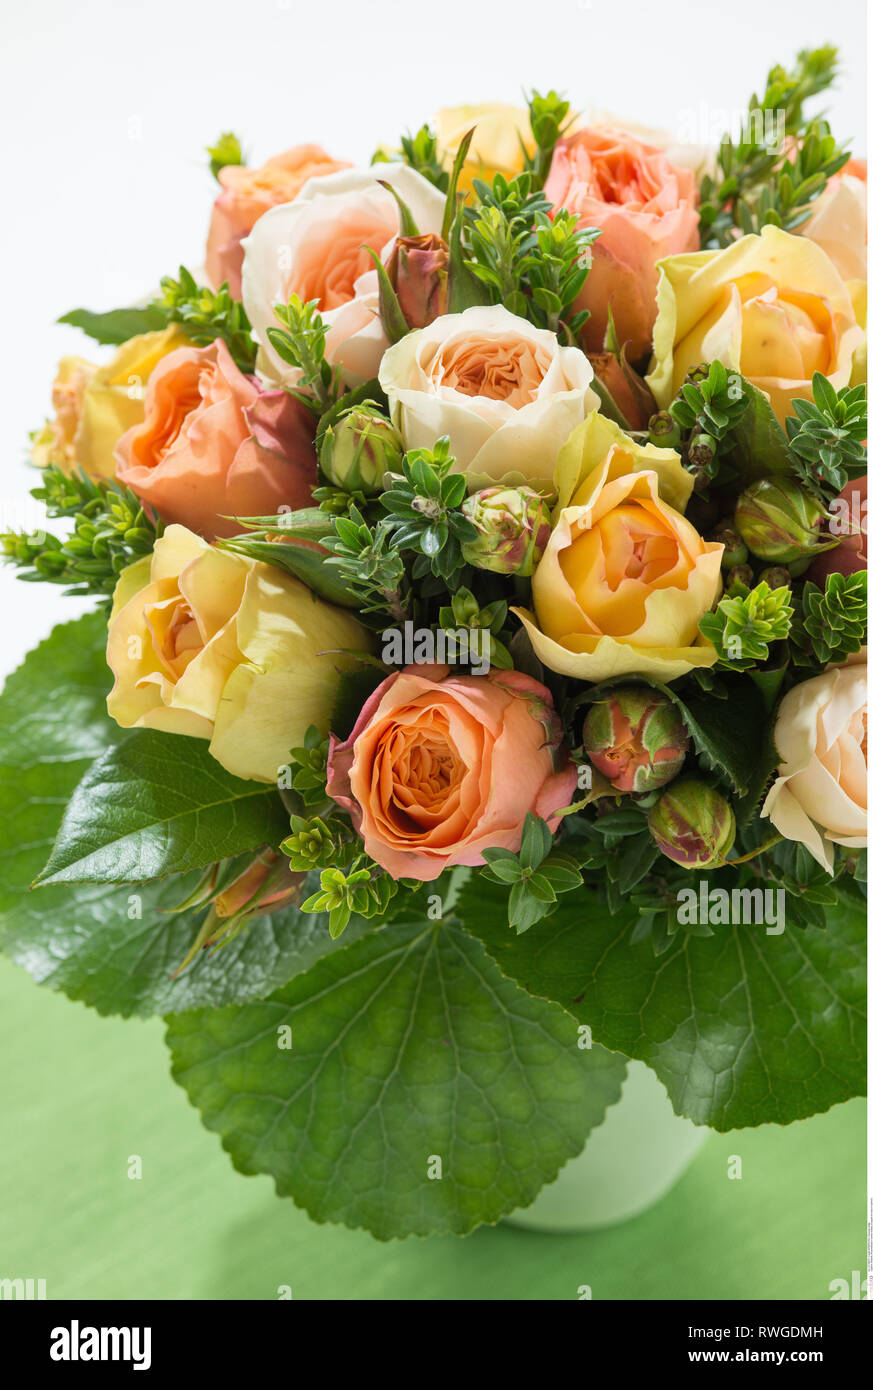 botany, bouquet of roses in salmon, Caution! For Greetingcard-Use / Postcard-Use In German Speaking Countries Certain Restrictions May Apply Stock Photo